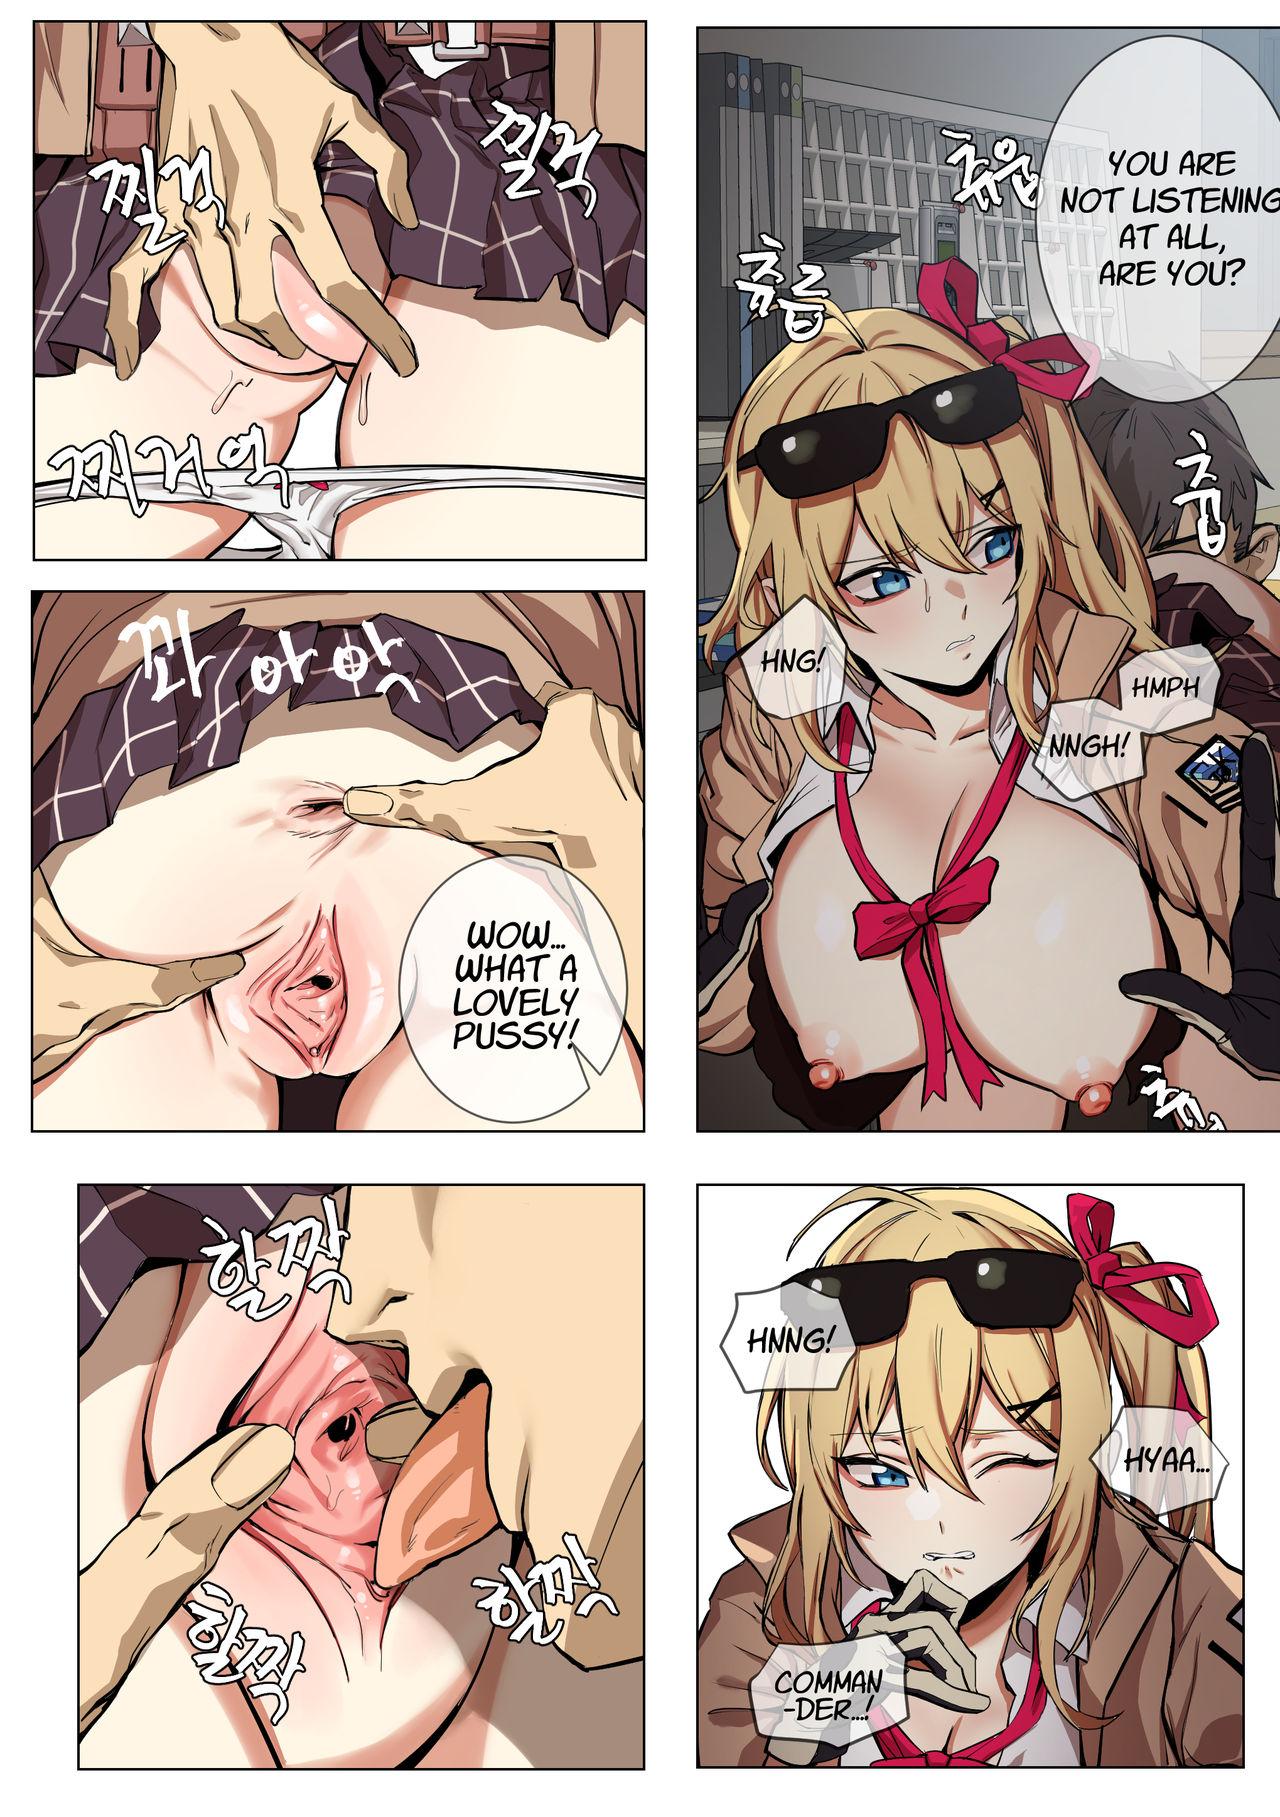 Best Blowjob Kalina | 카리나 - Girls frontline Dominicana - Page 8